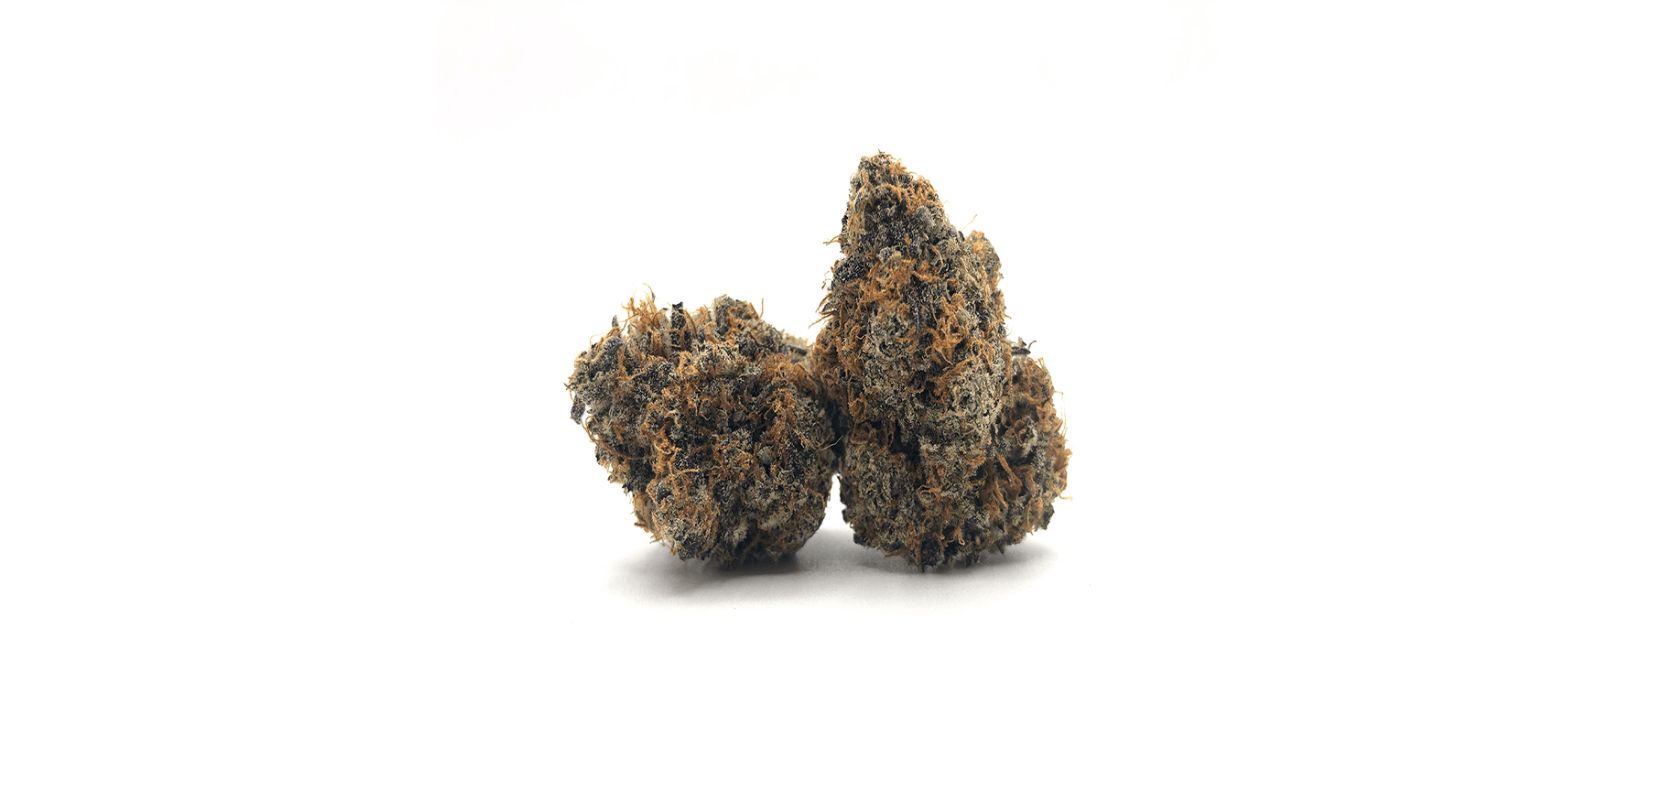 The Blue Coma strain may be mistaken for an Indica-dominant hybrid, but it's actually a Sativa powerhouse that can deliver a knockout blow with its THC content ranging from 18 to 24 percent. 